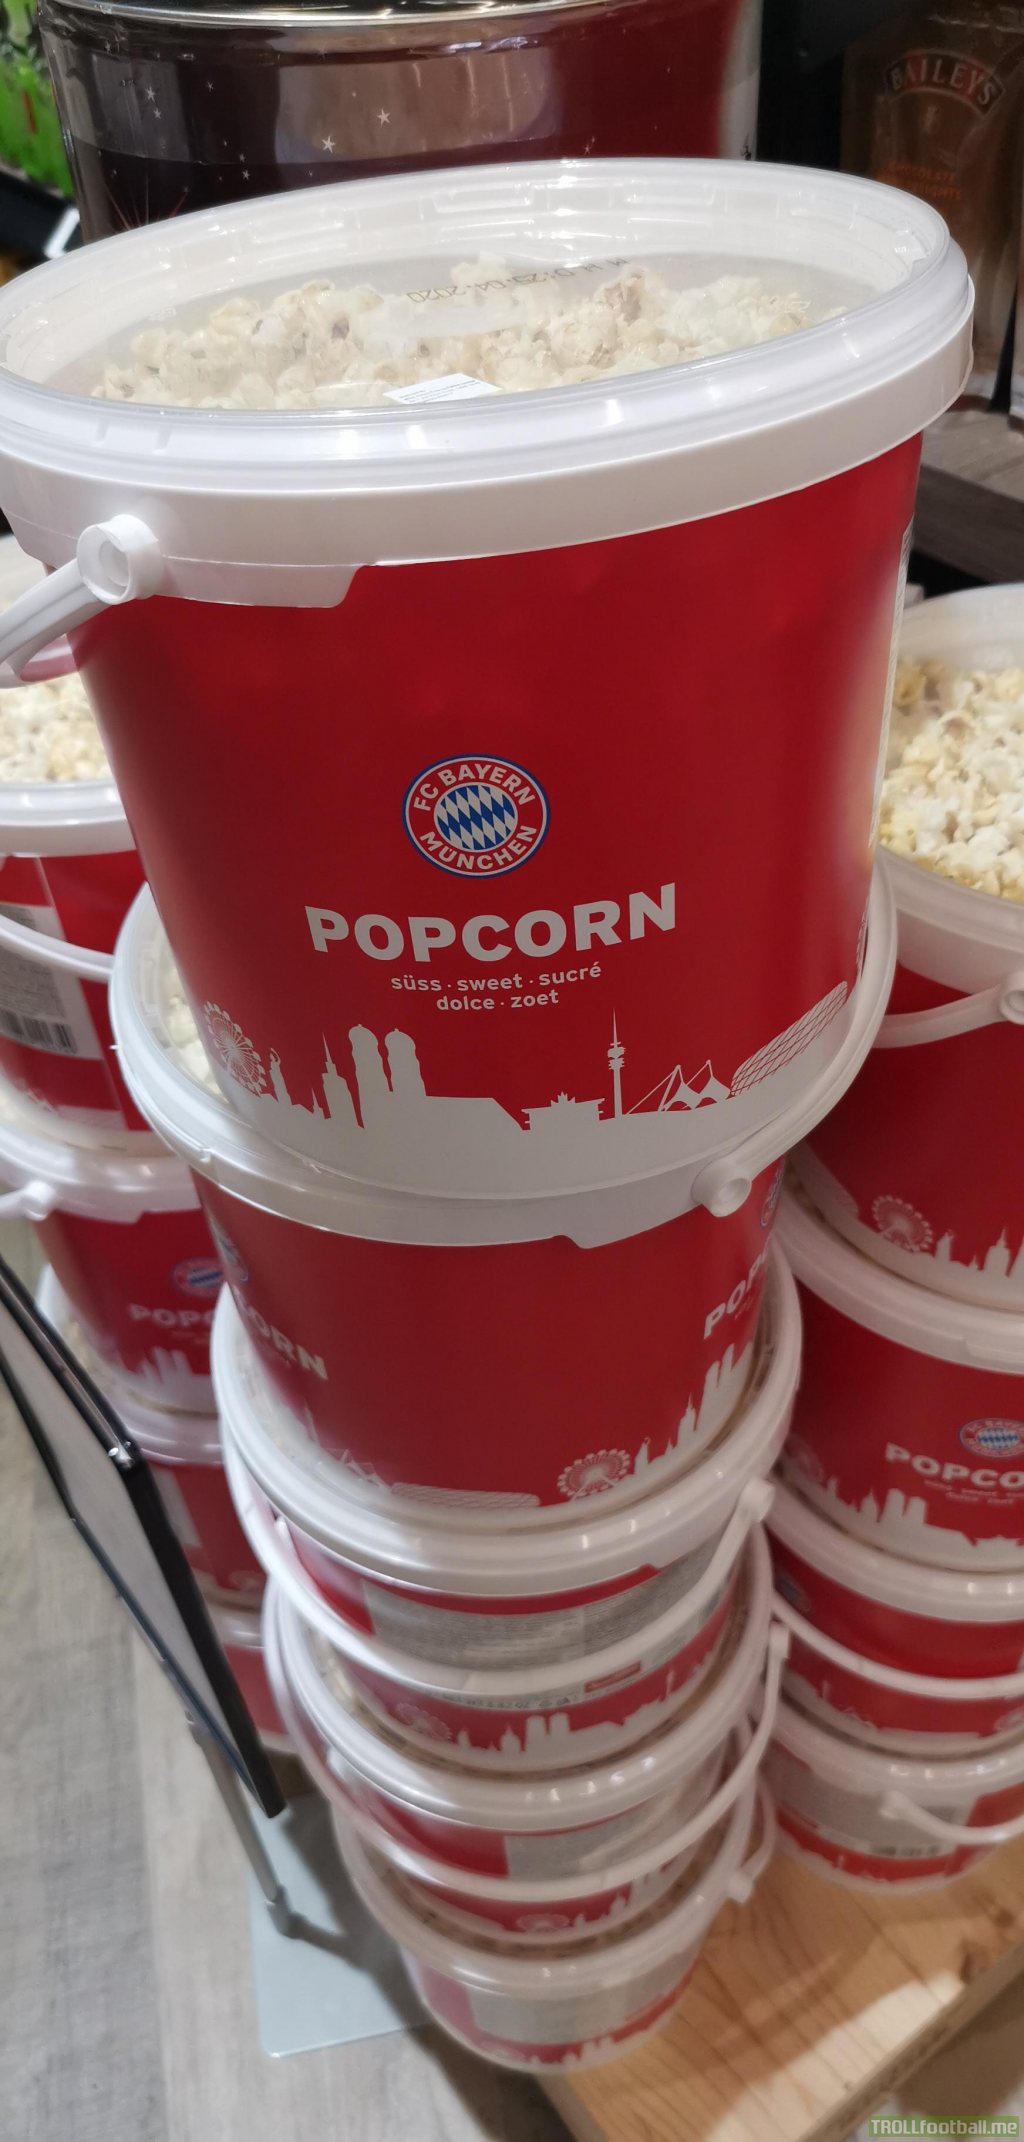 Fc bayern in the popcorn business now? Watch out Garrett's